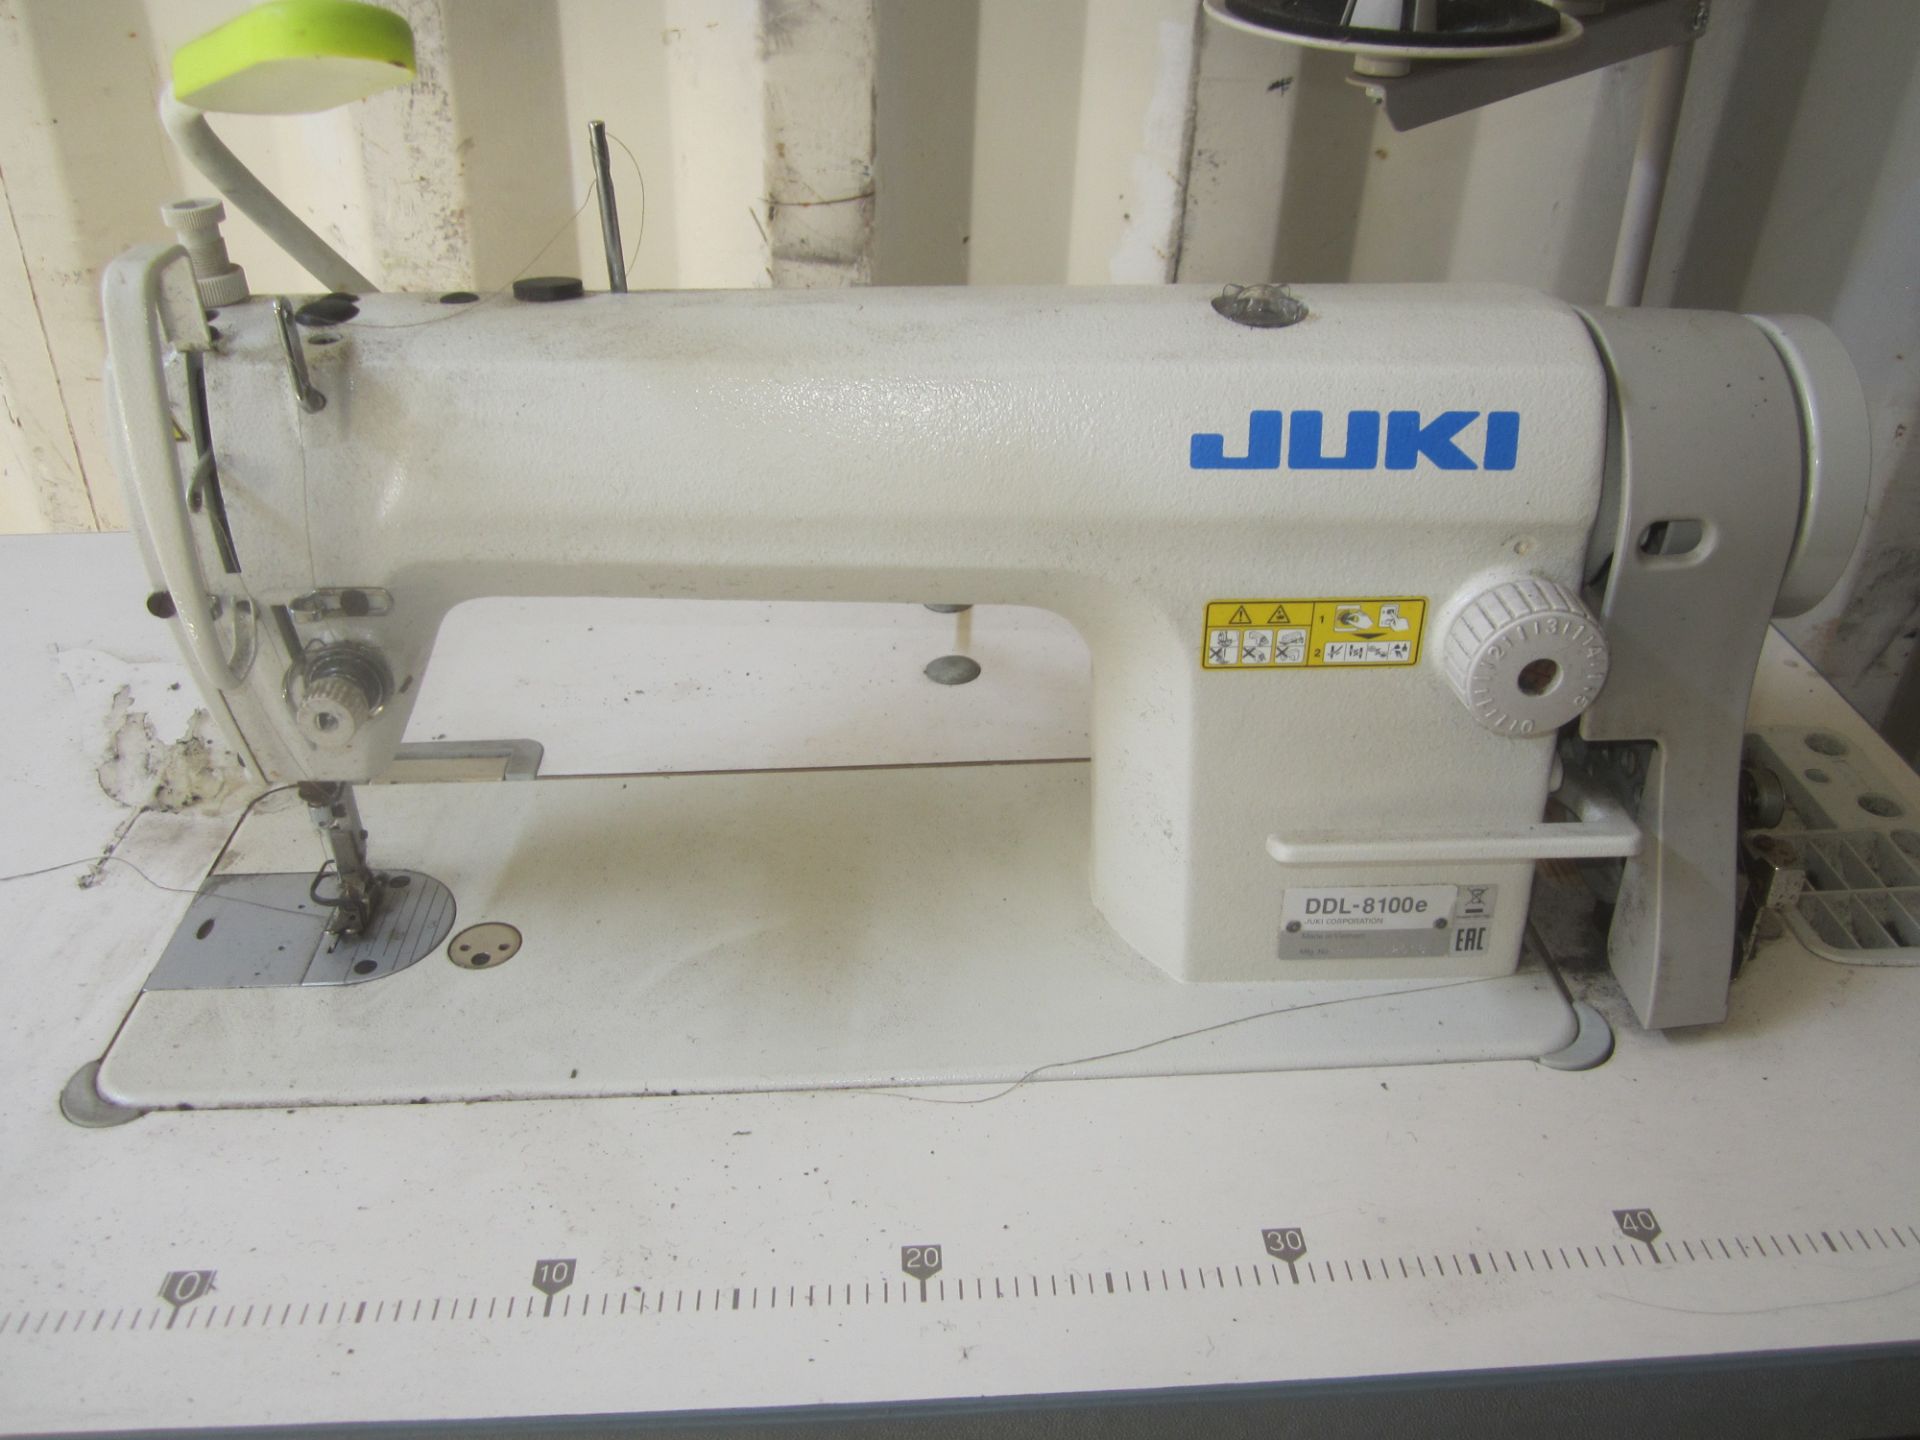 Juki Model DDL-8100e Industrial Sewing Machine, s/n PD0NL02018, with Table, Used only 6 Months - Image 2 of 5